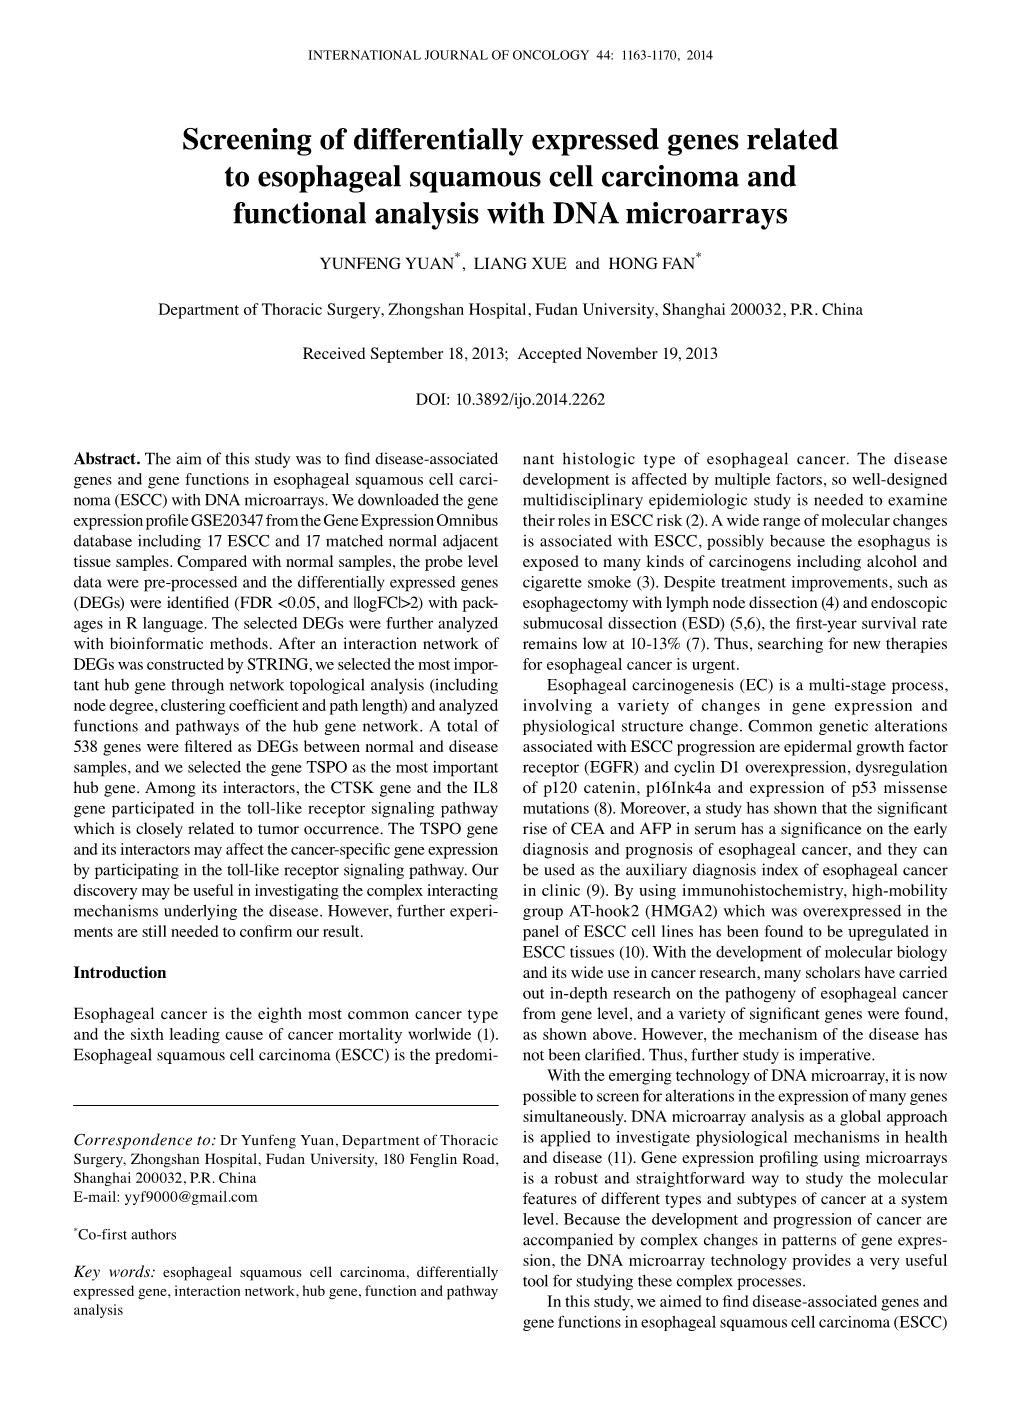 Screening of Differentially Expressed Genes Related to Esophageal Squamous Cell Carcinoma and Functional Analysis with DNA Microarrays